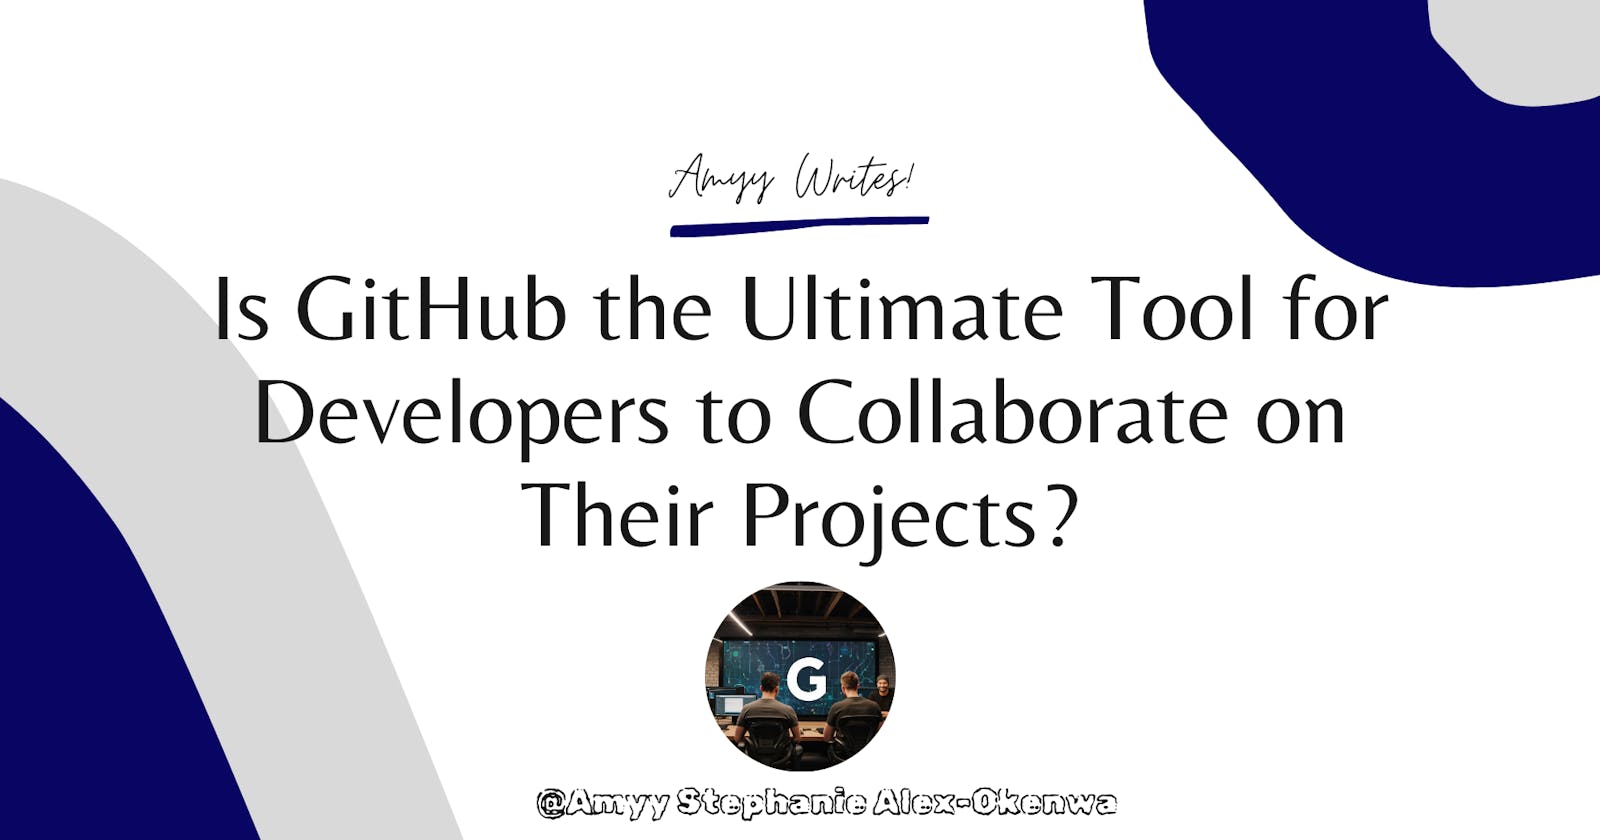 Is GitHub the Ultimate Tool for Developers to Collaborate on Their Projects?